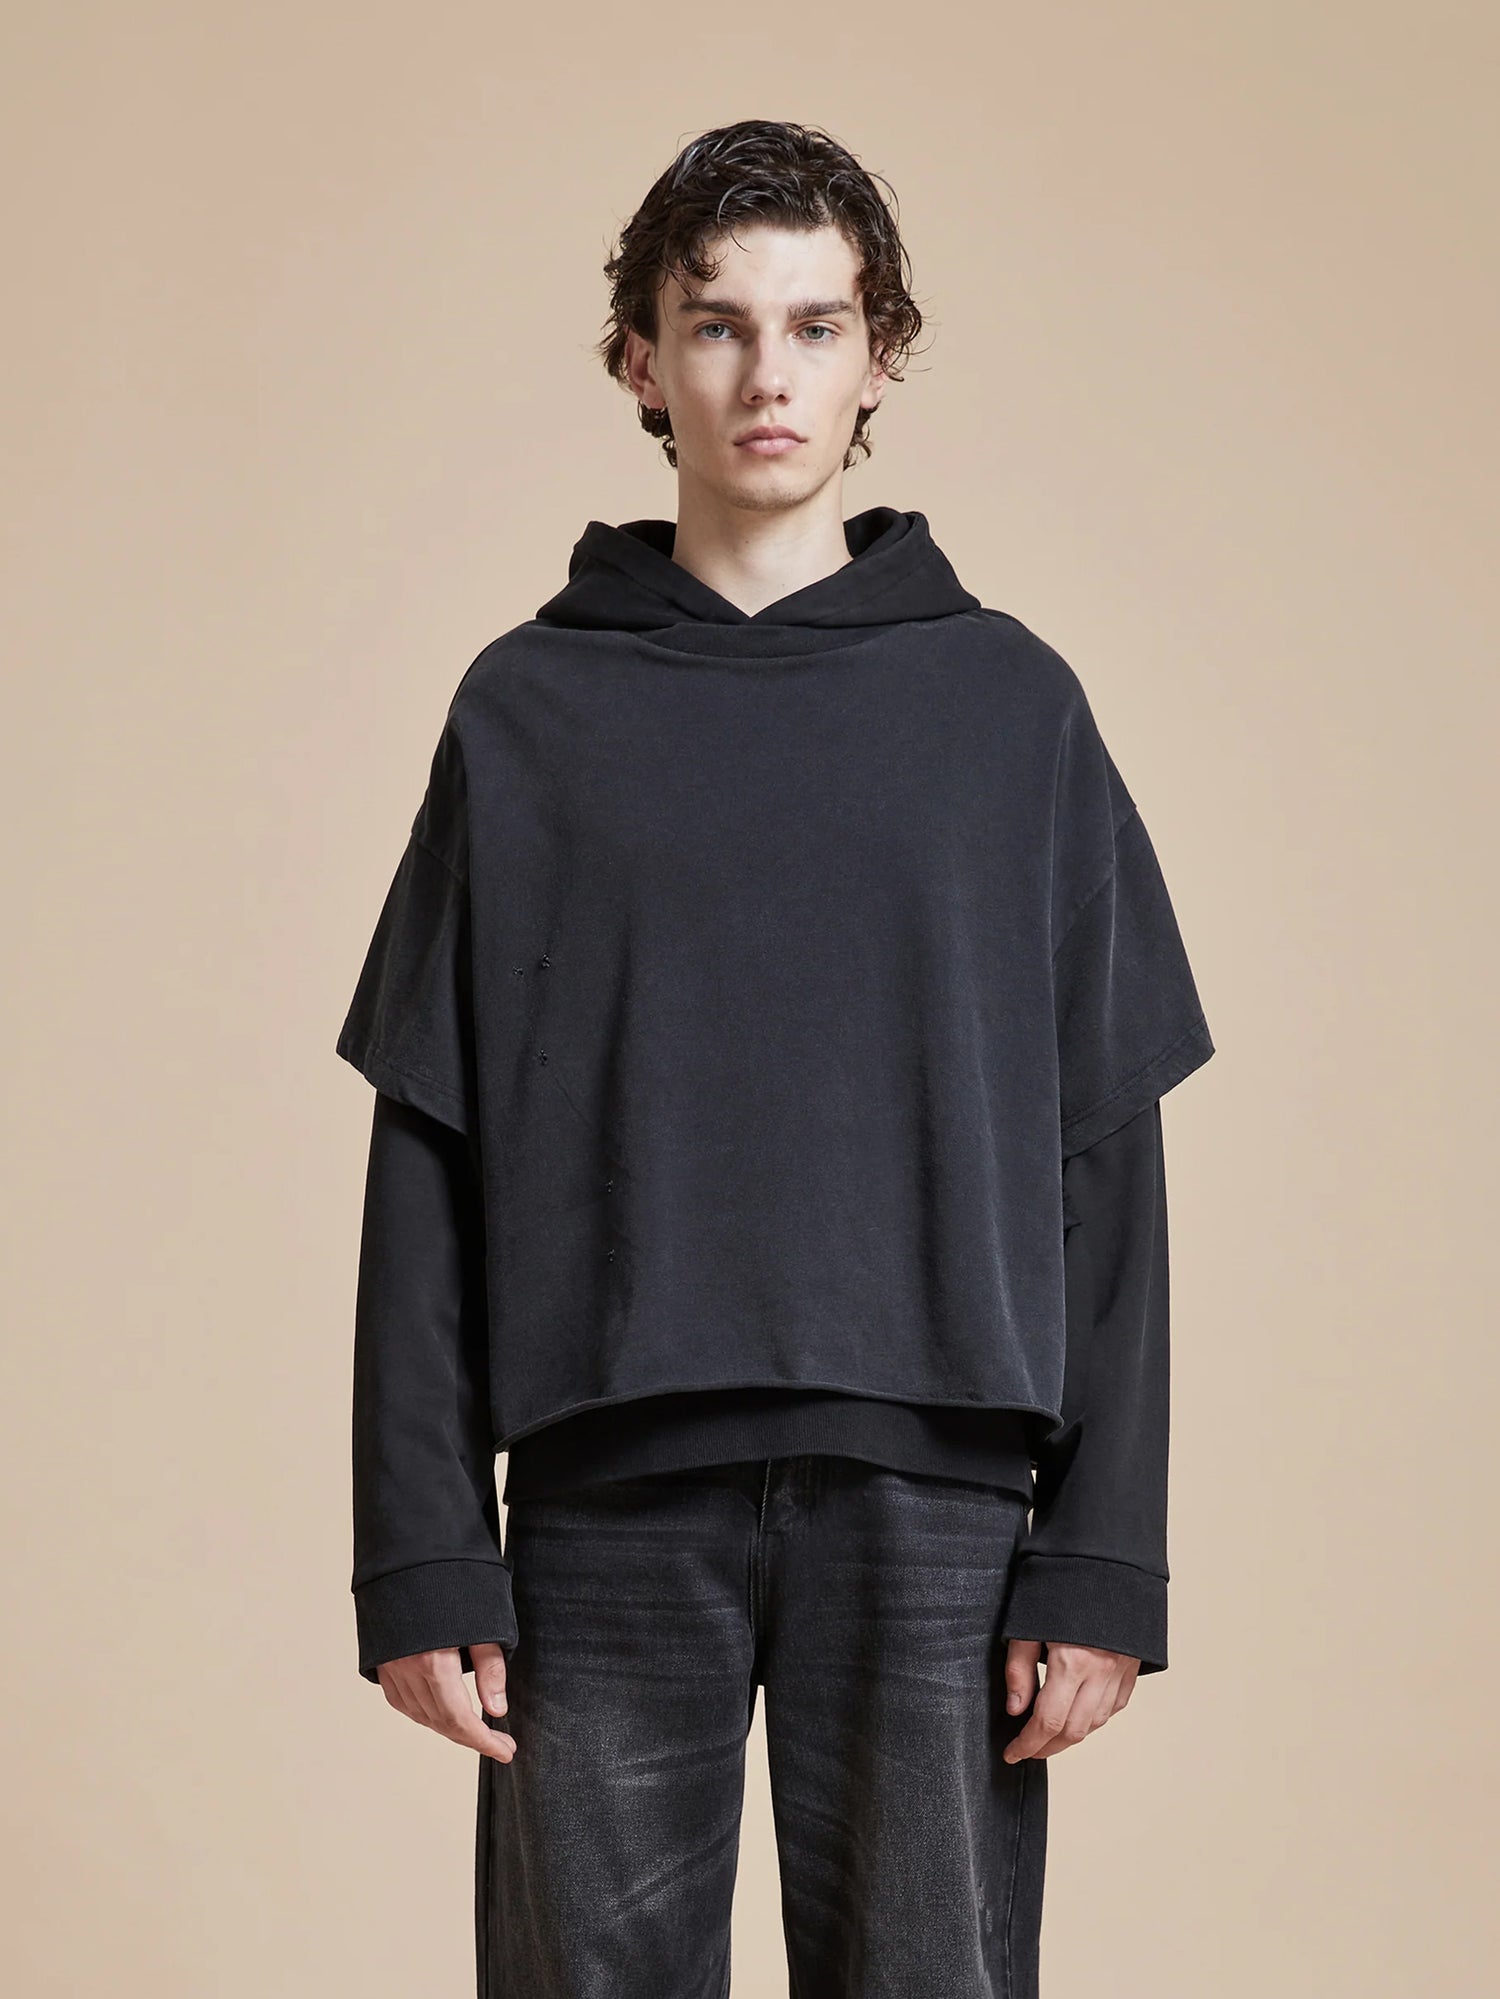 The model is wearing a Found Double Layer Hoodie.